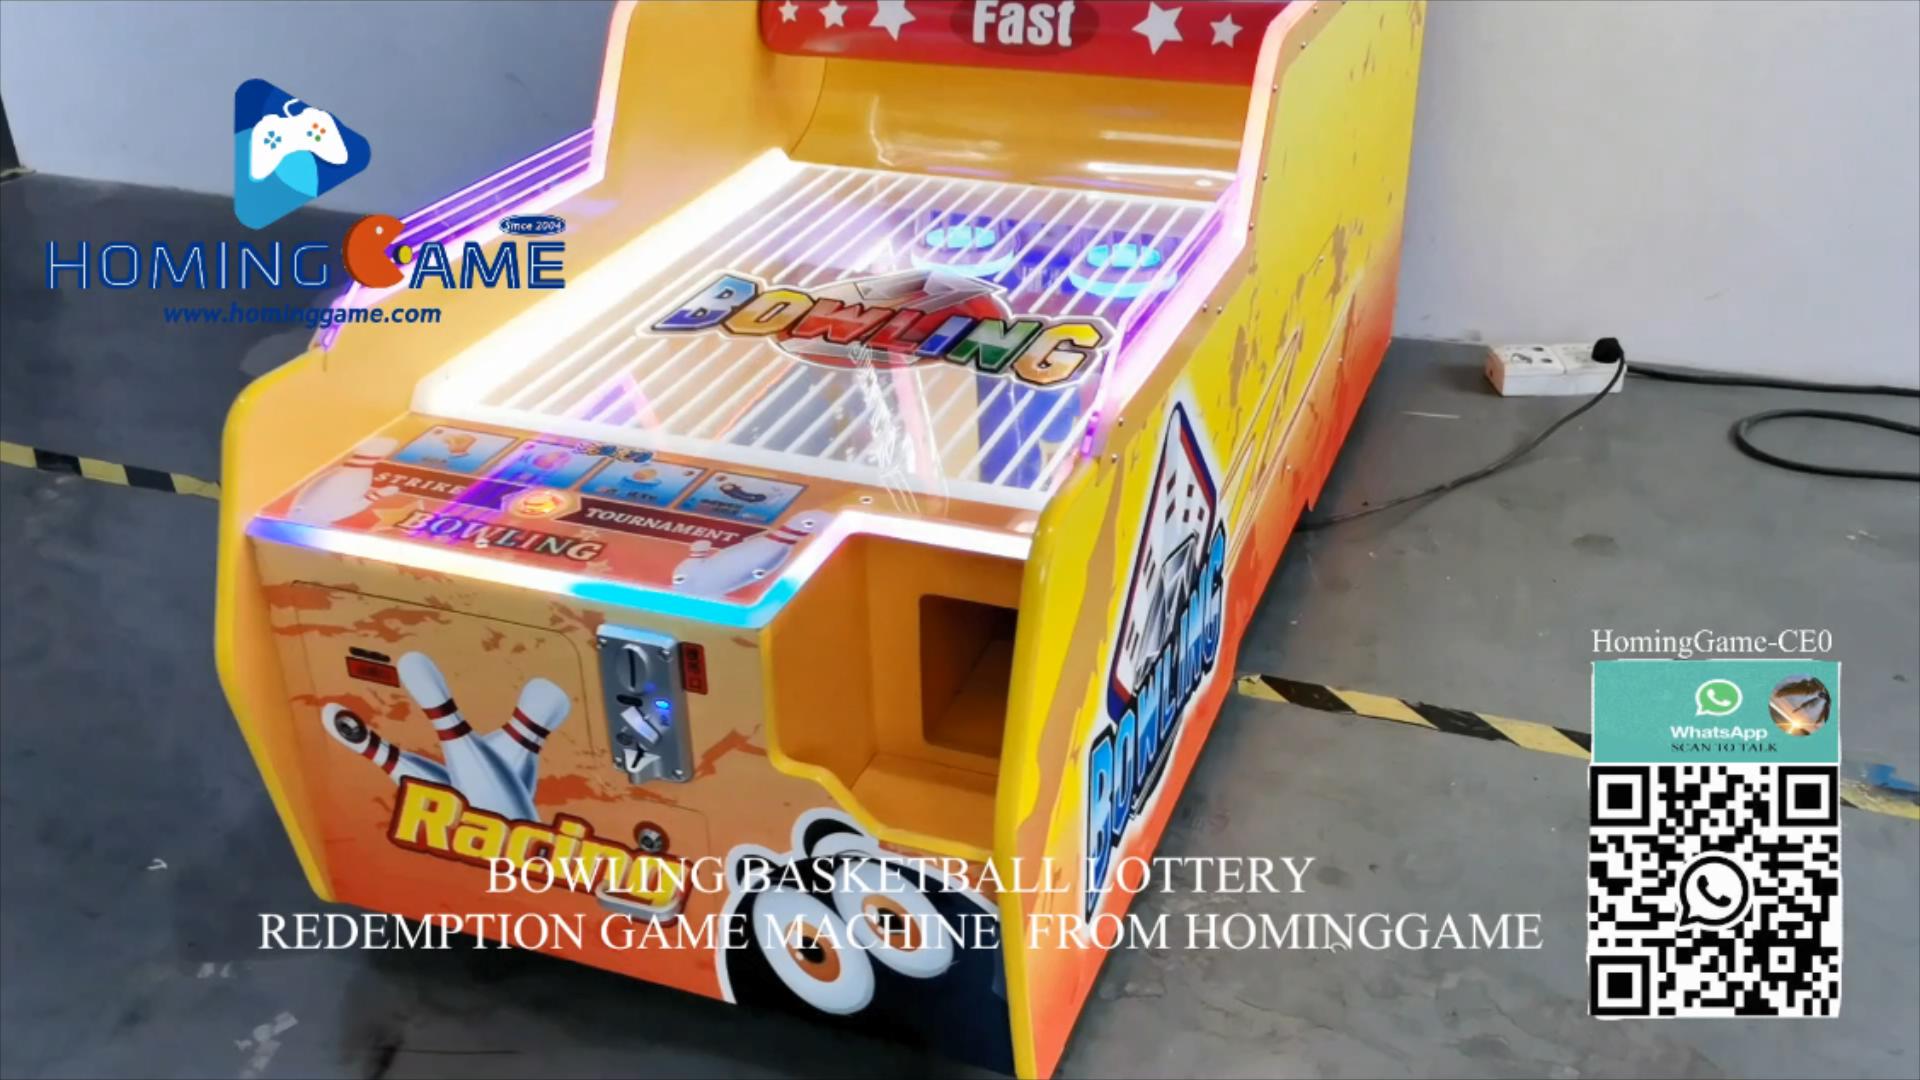 bowling basketball game machine,bowling arcade game machine,bowling basketball lottery game machine,bowling arcade game machine for sale,fancy bowling game machine,bowling game,fancy bowling arcade game machine,bowling machine,bowling amsuement game machine,game machine,arcade game machine,coin operated game machine,indoor game machine,electrical game machine,kids game,redemption game machine,redemption ticket game machine,kids game equipment,game equipment,amsuement machine,arcade game machine for sale,hominggame,www.gametube.hk,family entertainment,entertainment game machine,amusment park game equipment,kids arcade redemption game machine,coin operated lottery game machine